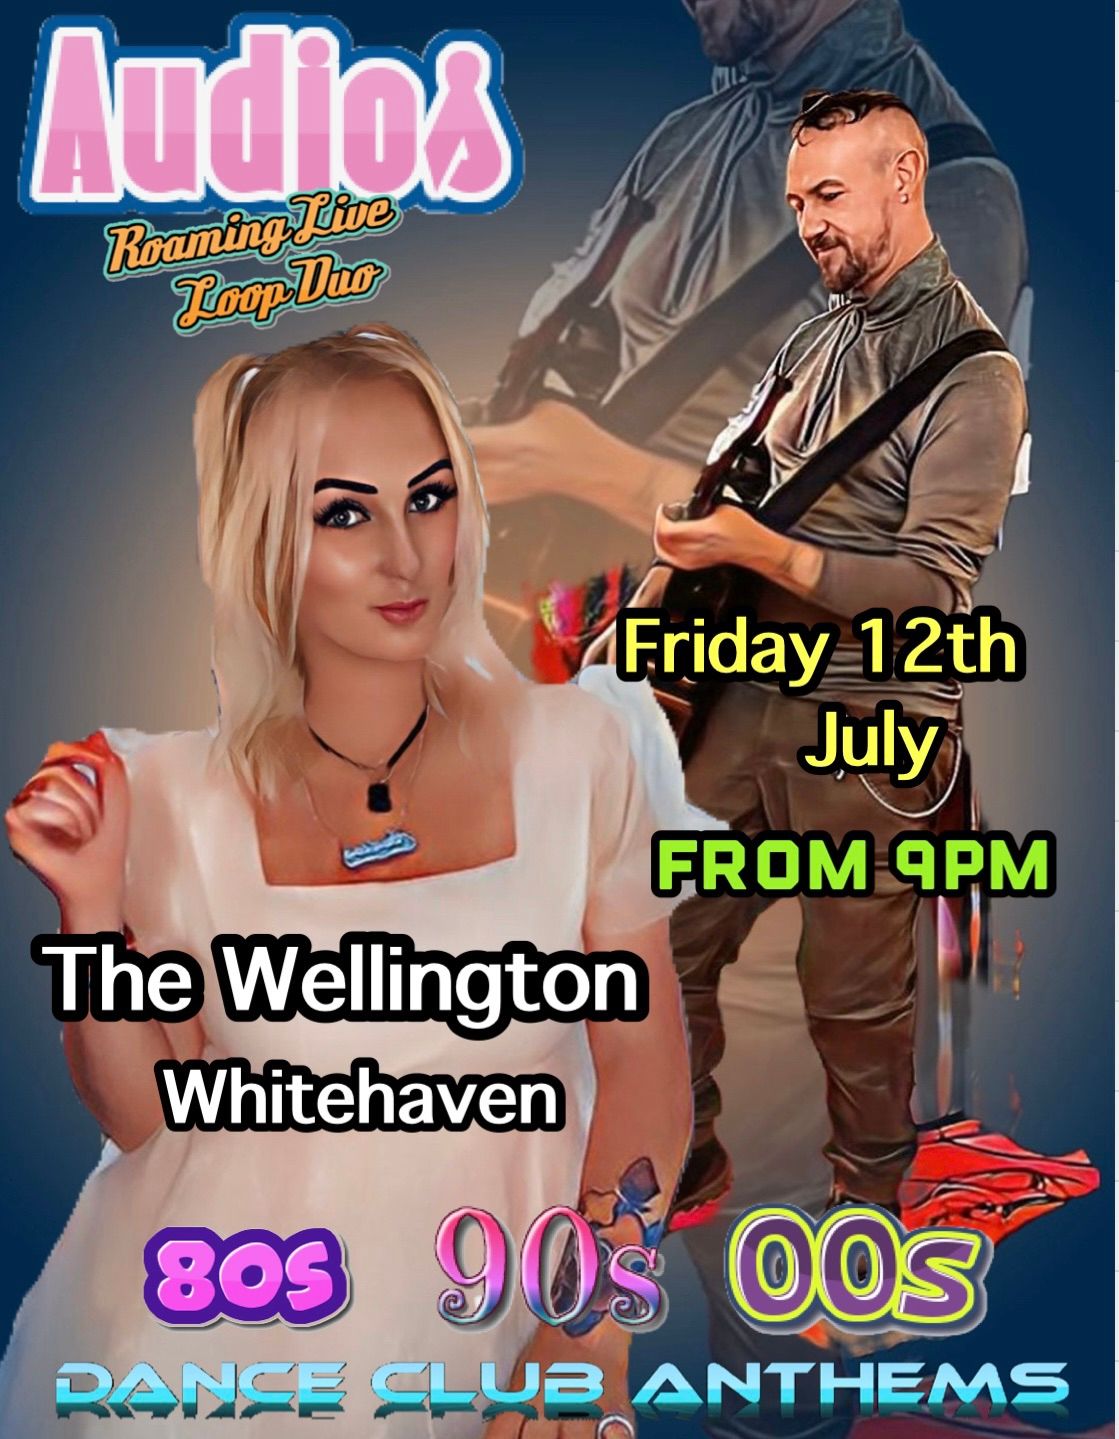 Live @ The Wellington Whitehaven from 9pm 